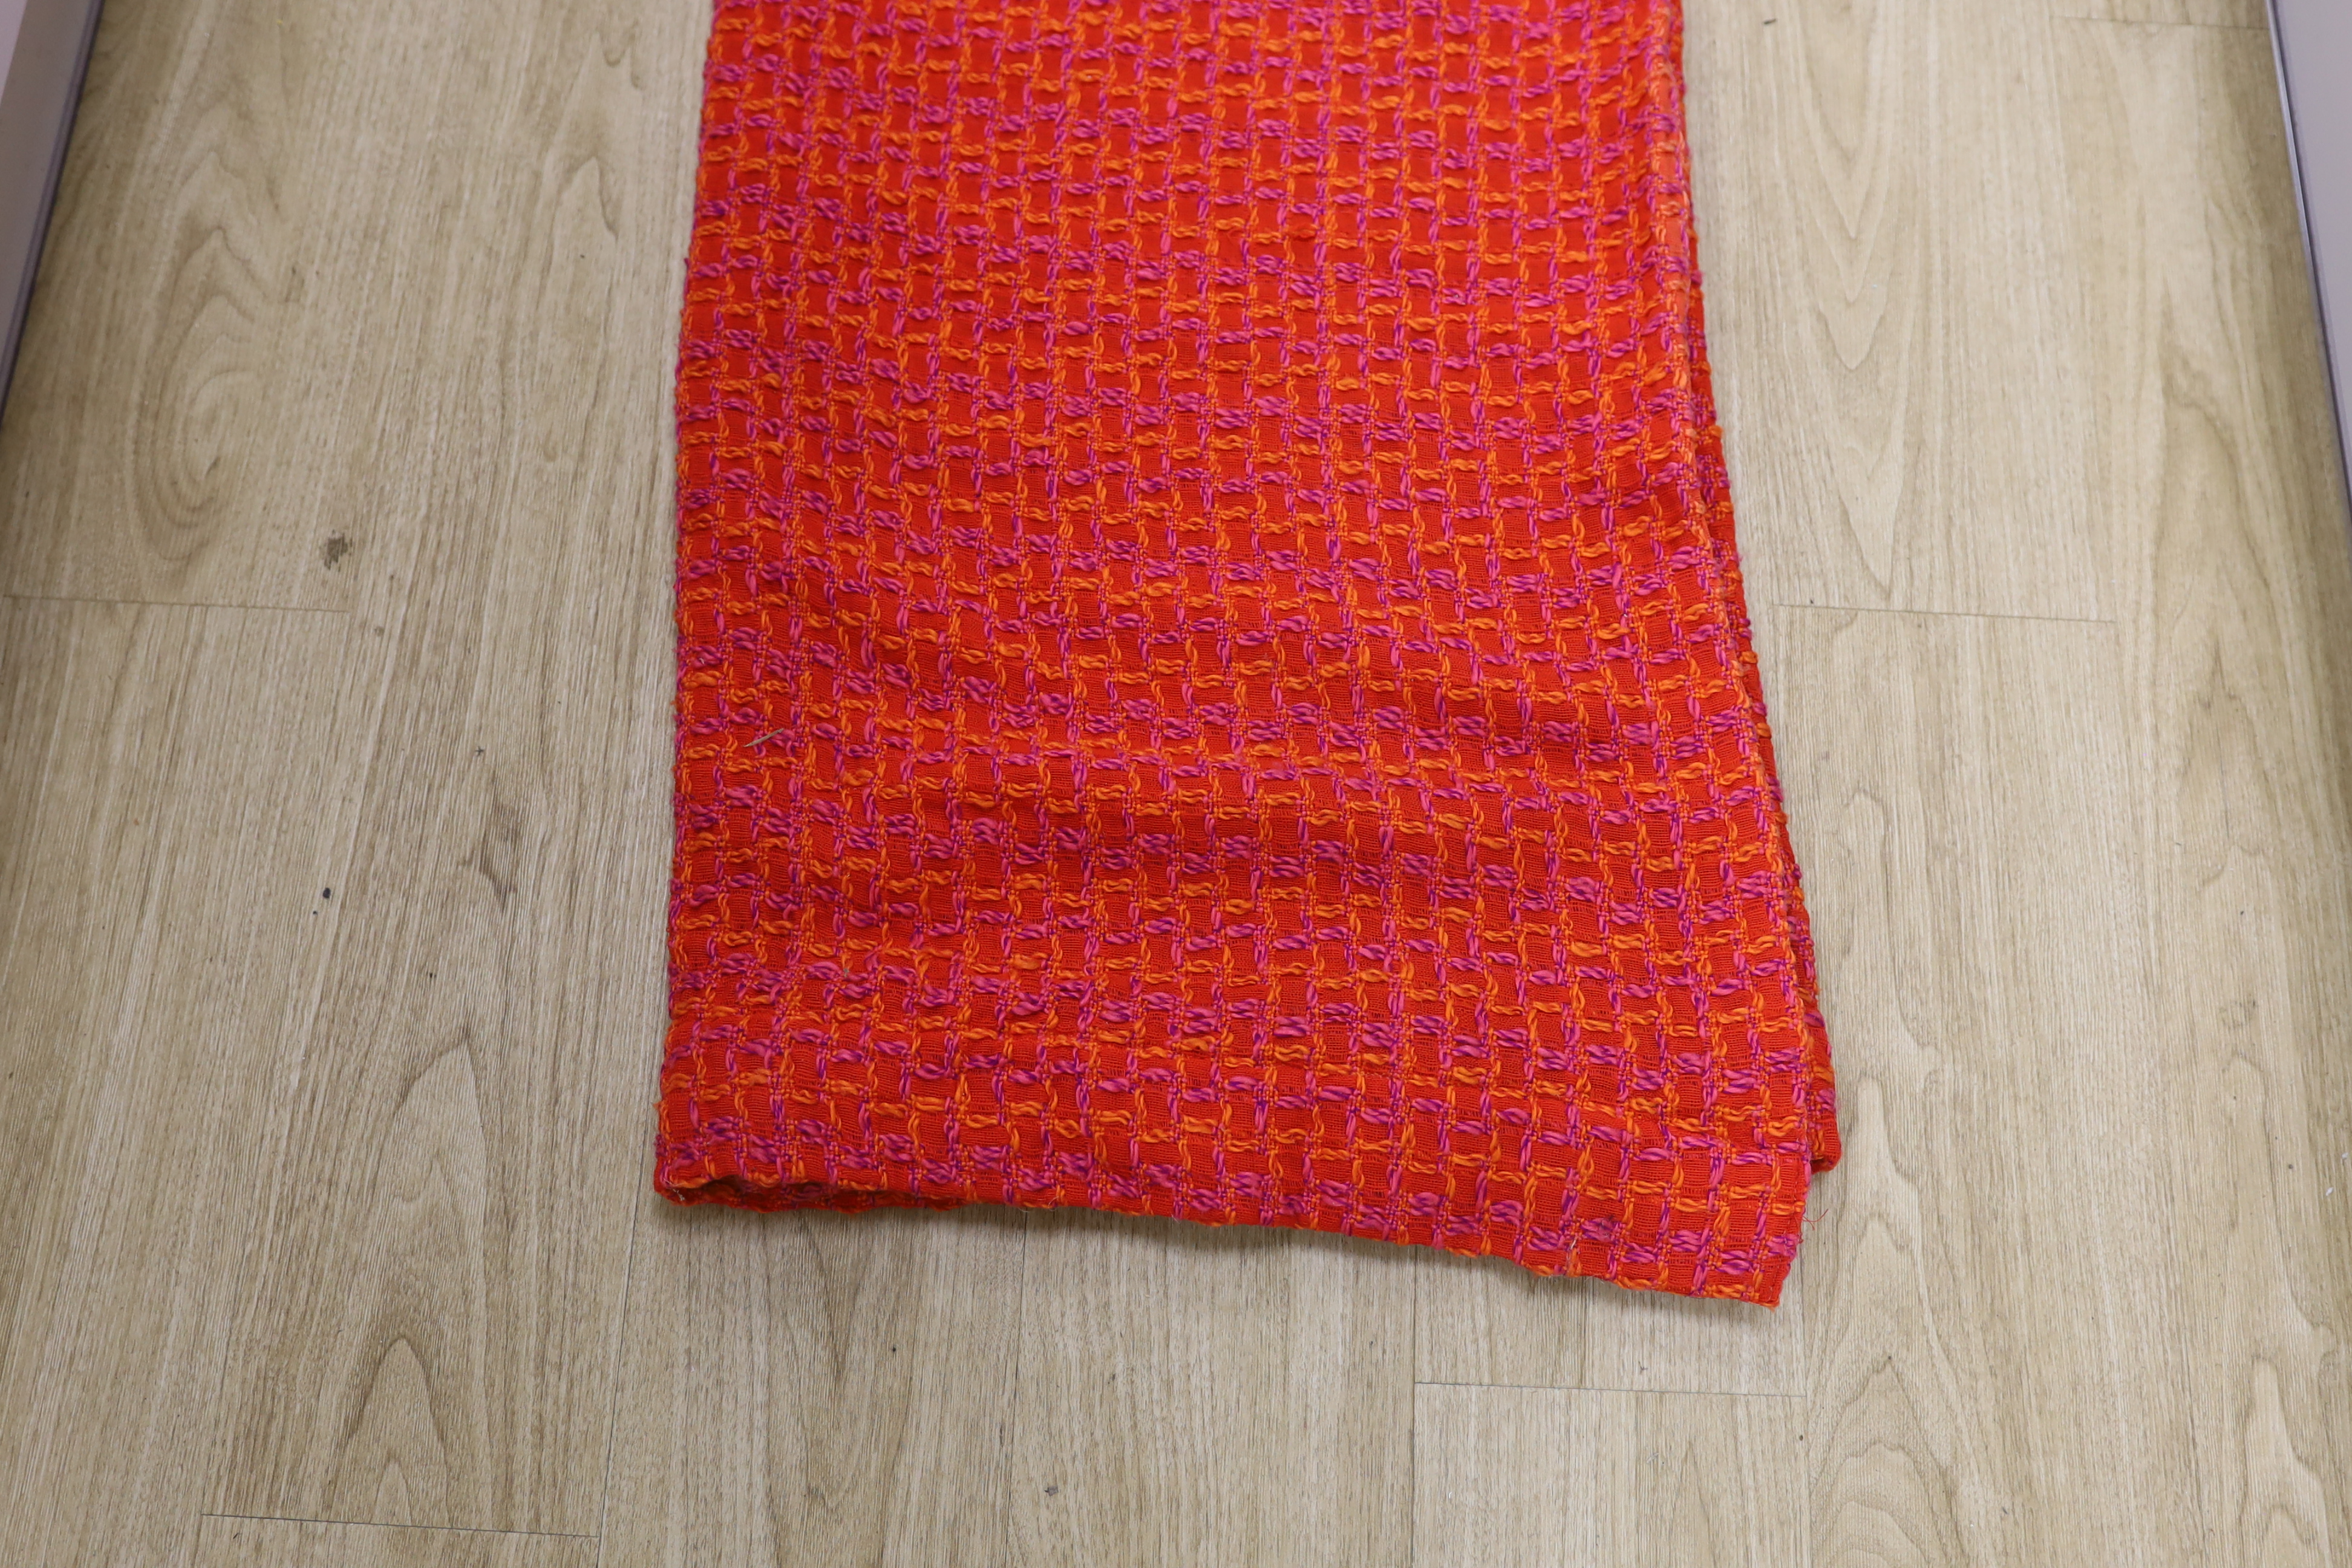 An unusual woven 1960's curtain in orange, pink and purple wools in a square overall pattern